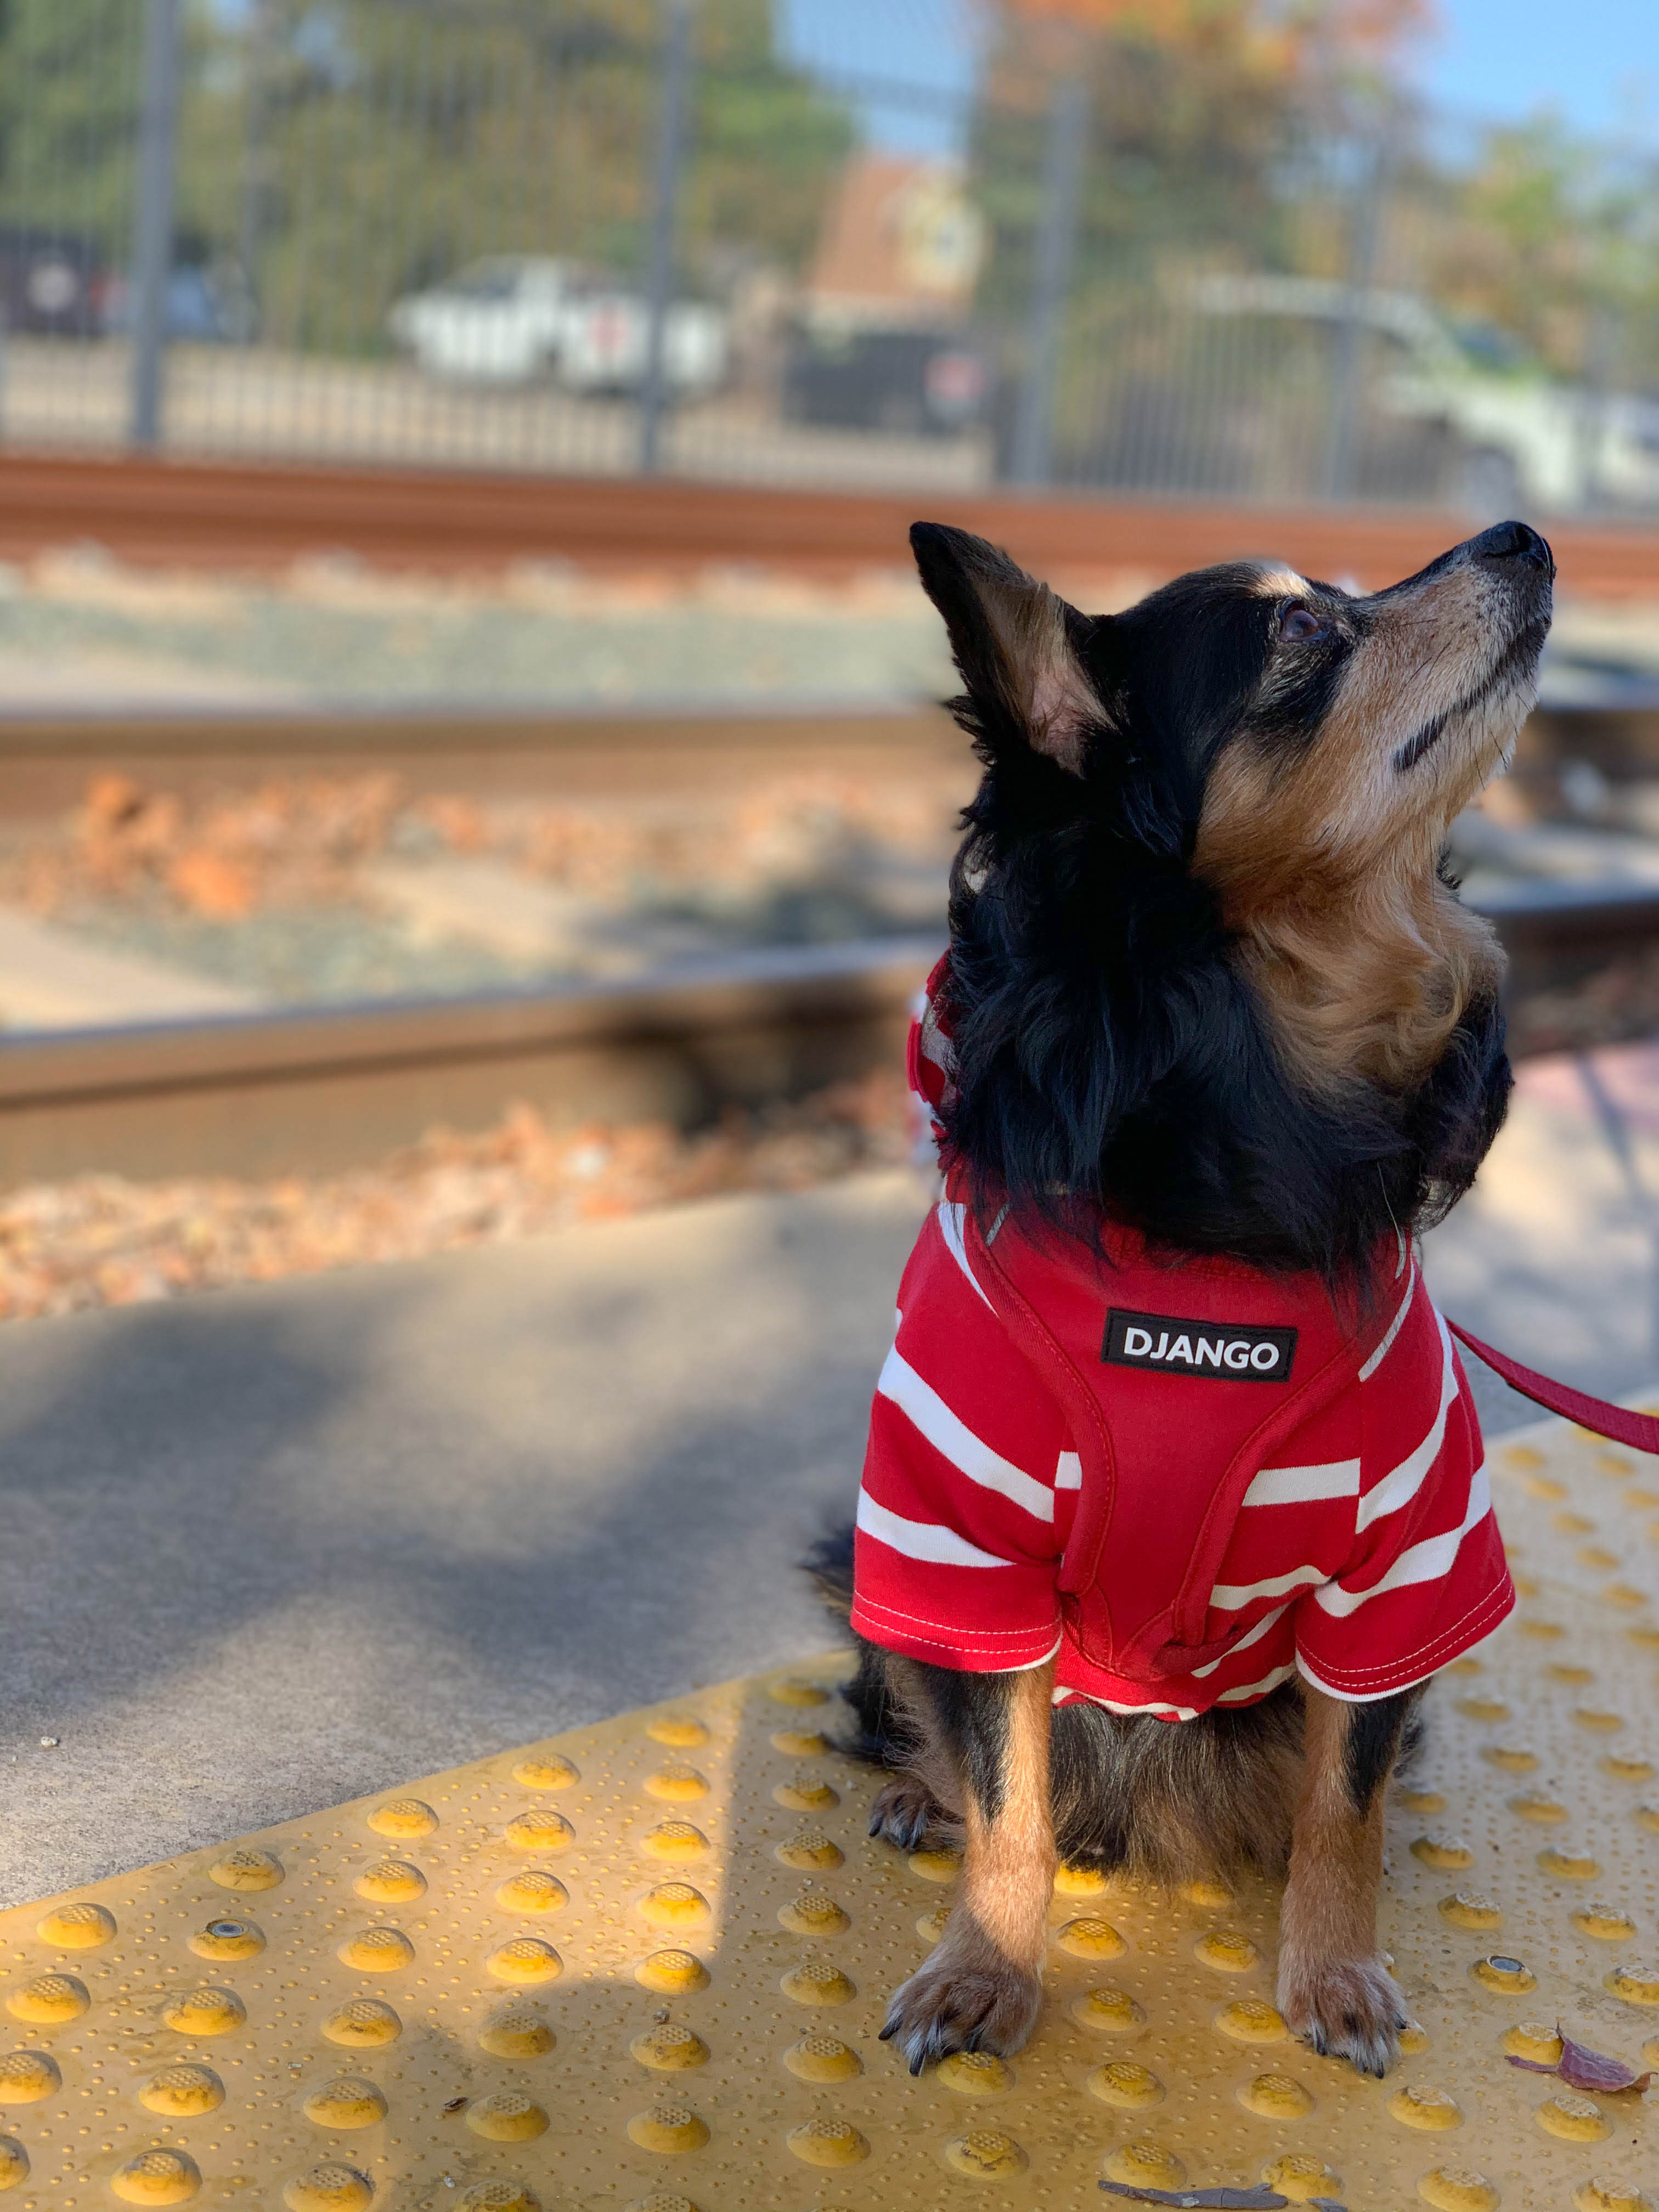 DJANGO Dog Hoodie - Pair your red and white striped dog hoodie with your favorite DJANGO Adventure Dog Harness for the ultimate look! Style tip? Layer your DJANGO dog harness over your DJANGO dog hoodie for easy D-ring access and optimal comfort. - djangobrand.com